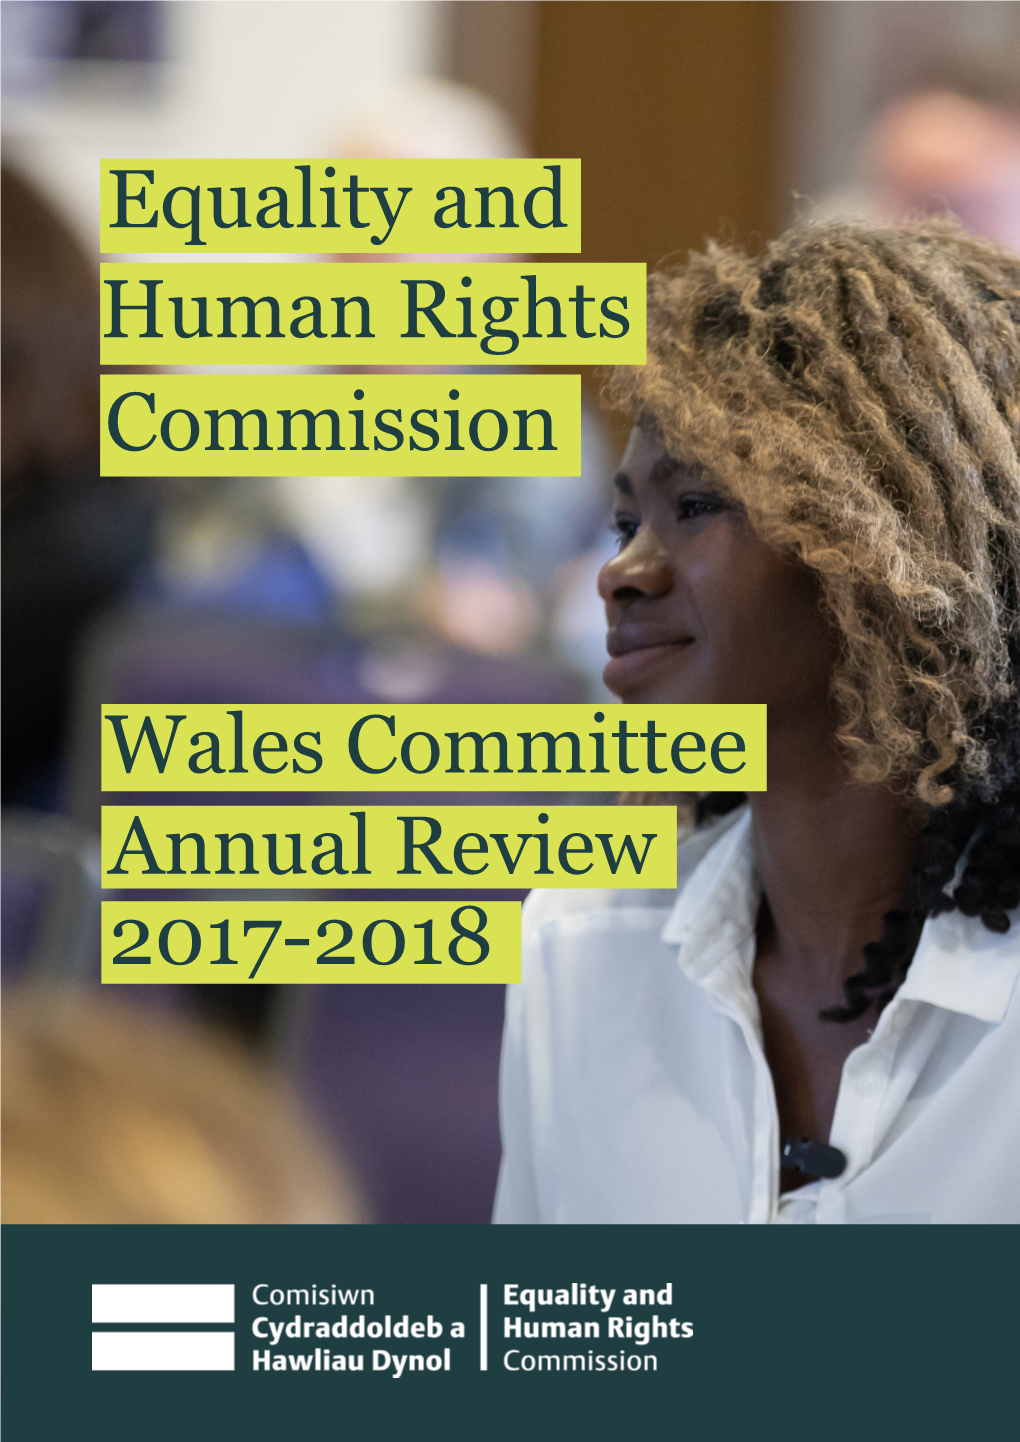 Wales Committee Annual Review 2017-2018